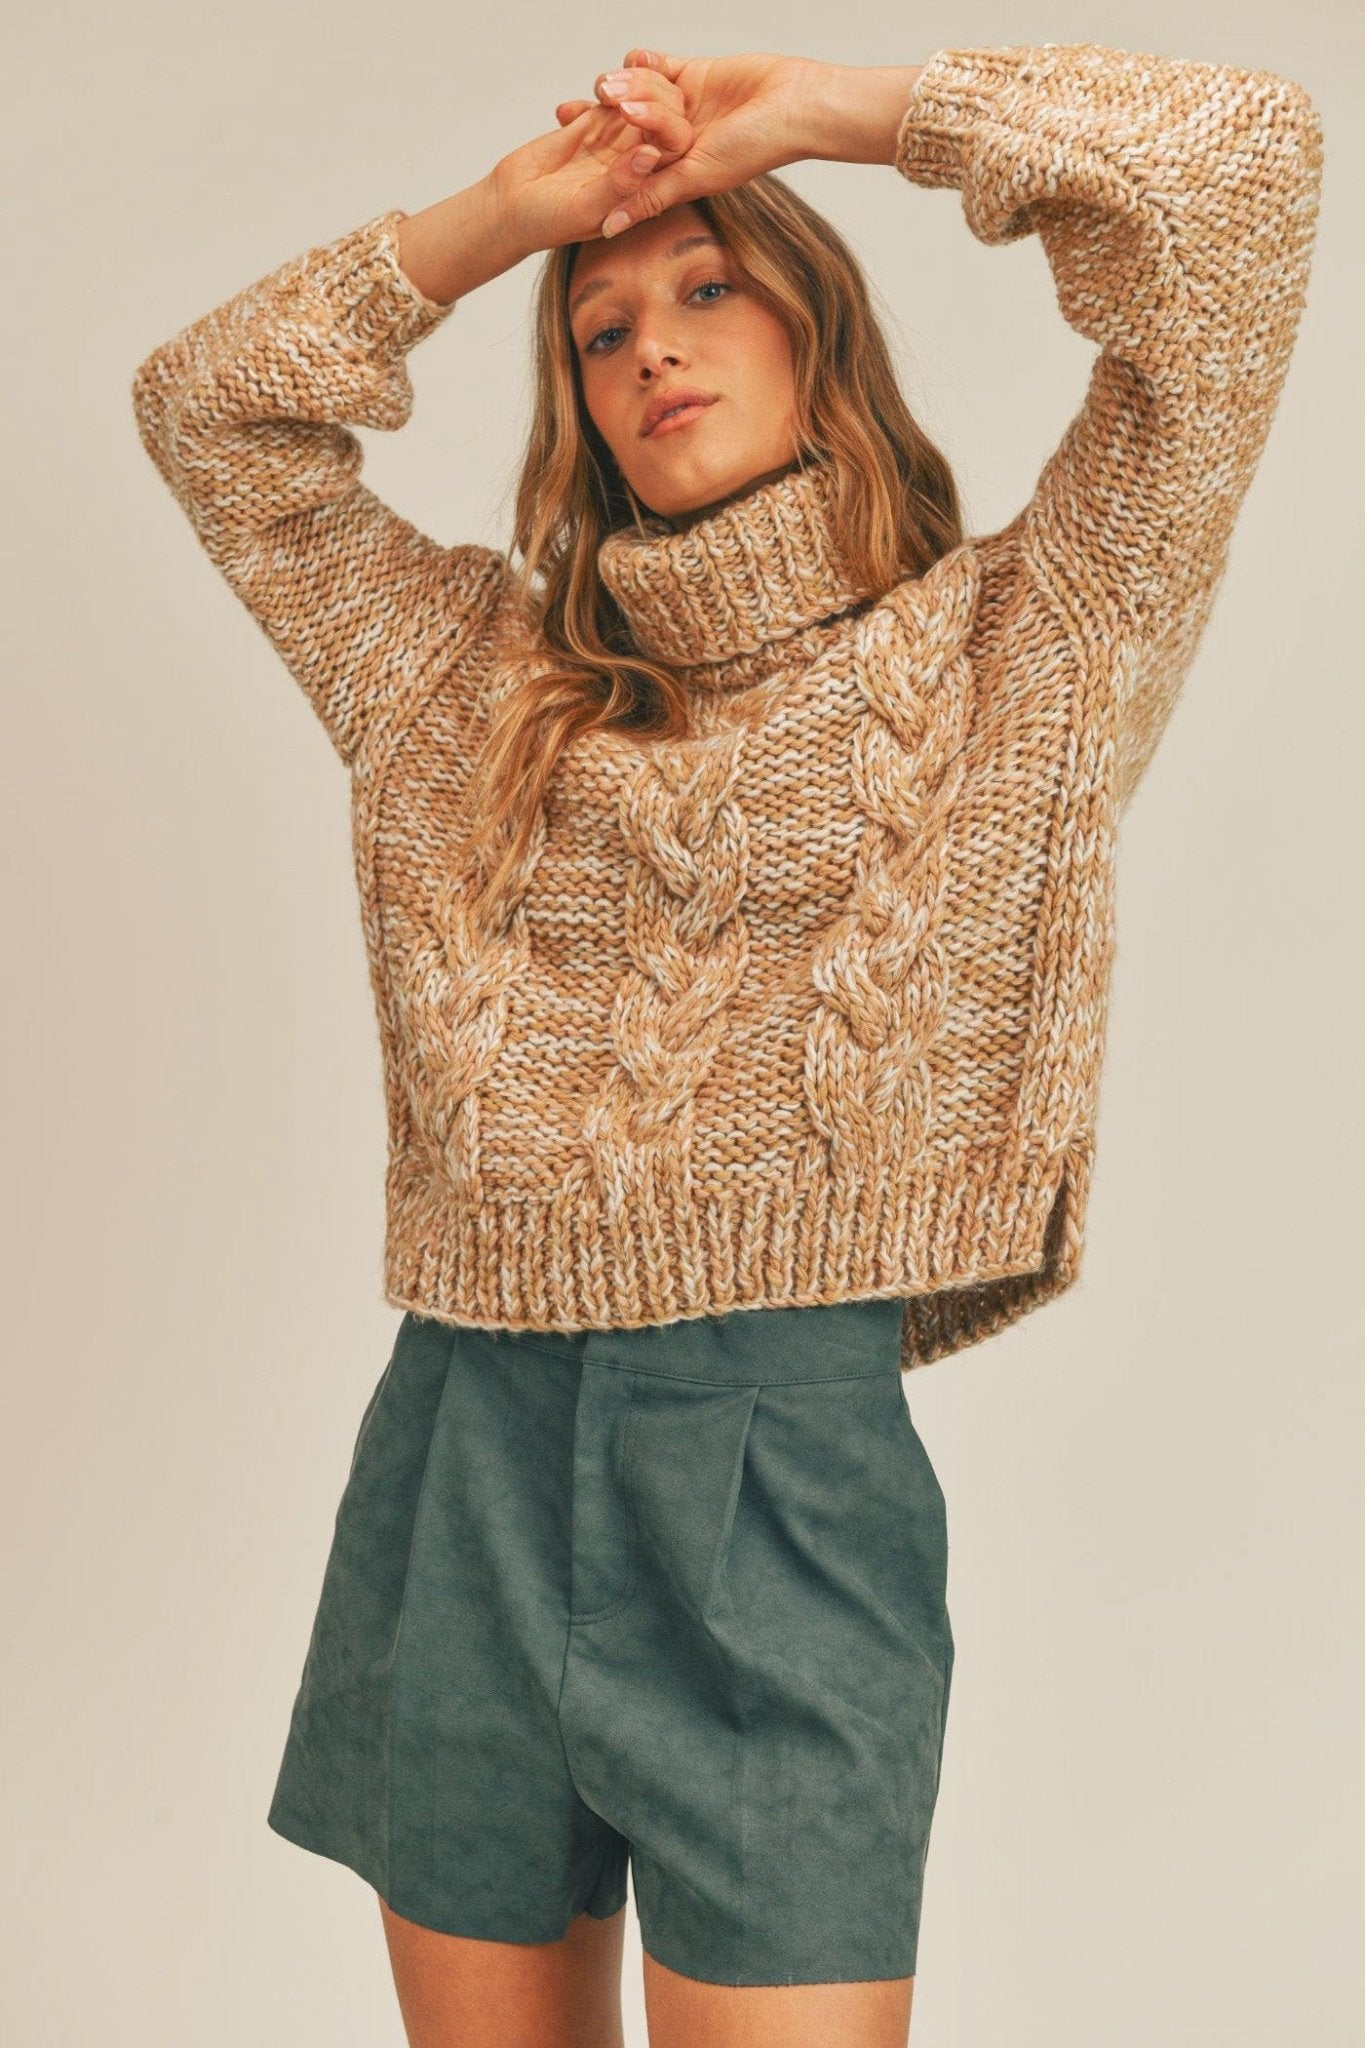 Sage The Label Hey Now Cut Out 2 Tone Chunky Knit Turtleneck Sweater - Shirts & Tops - Blooming Daily